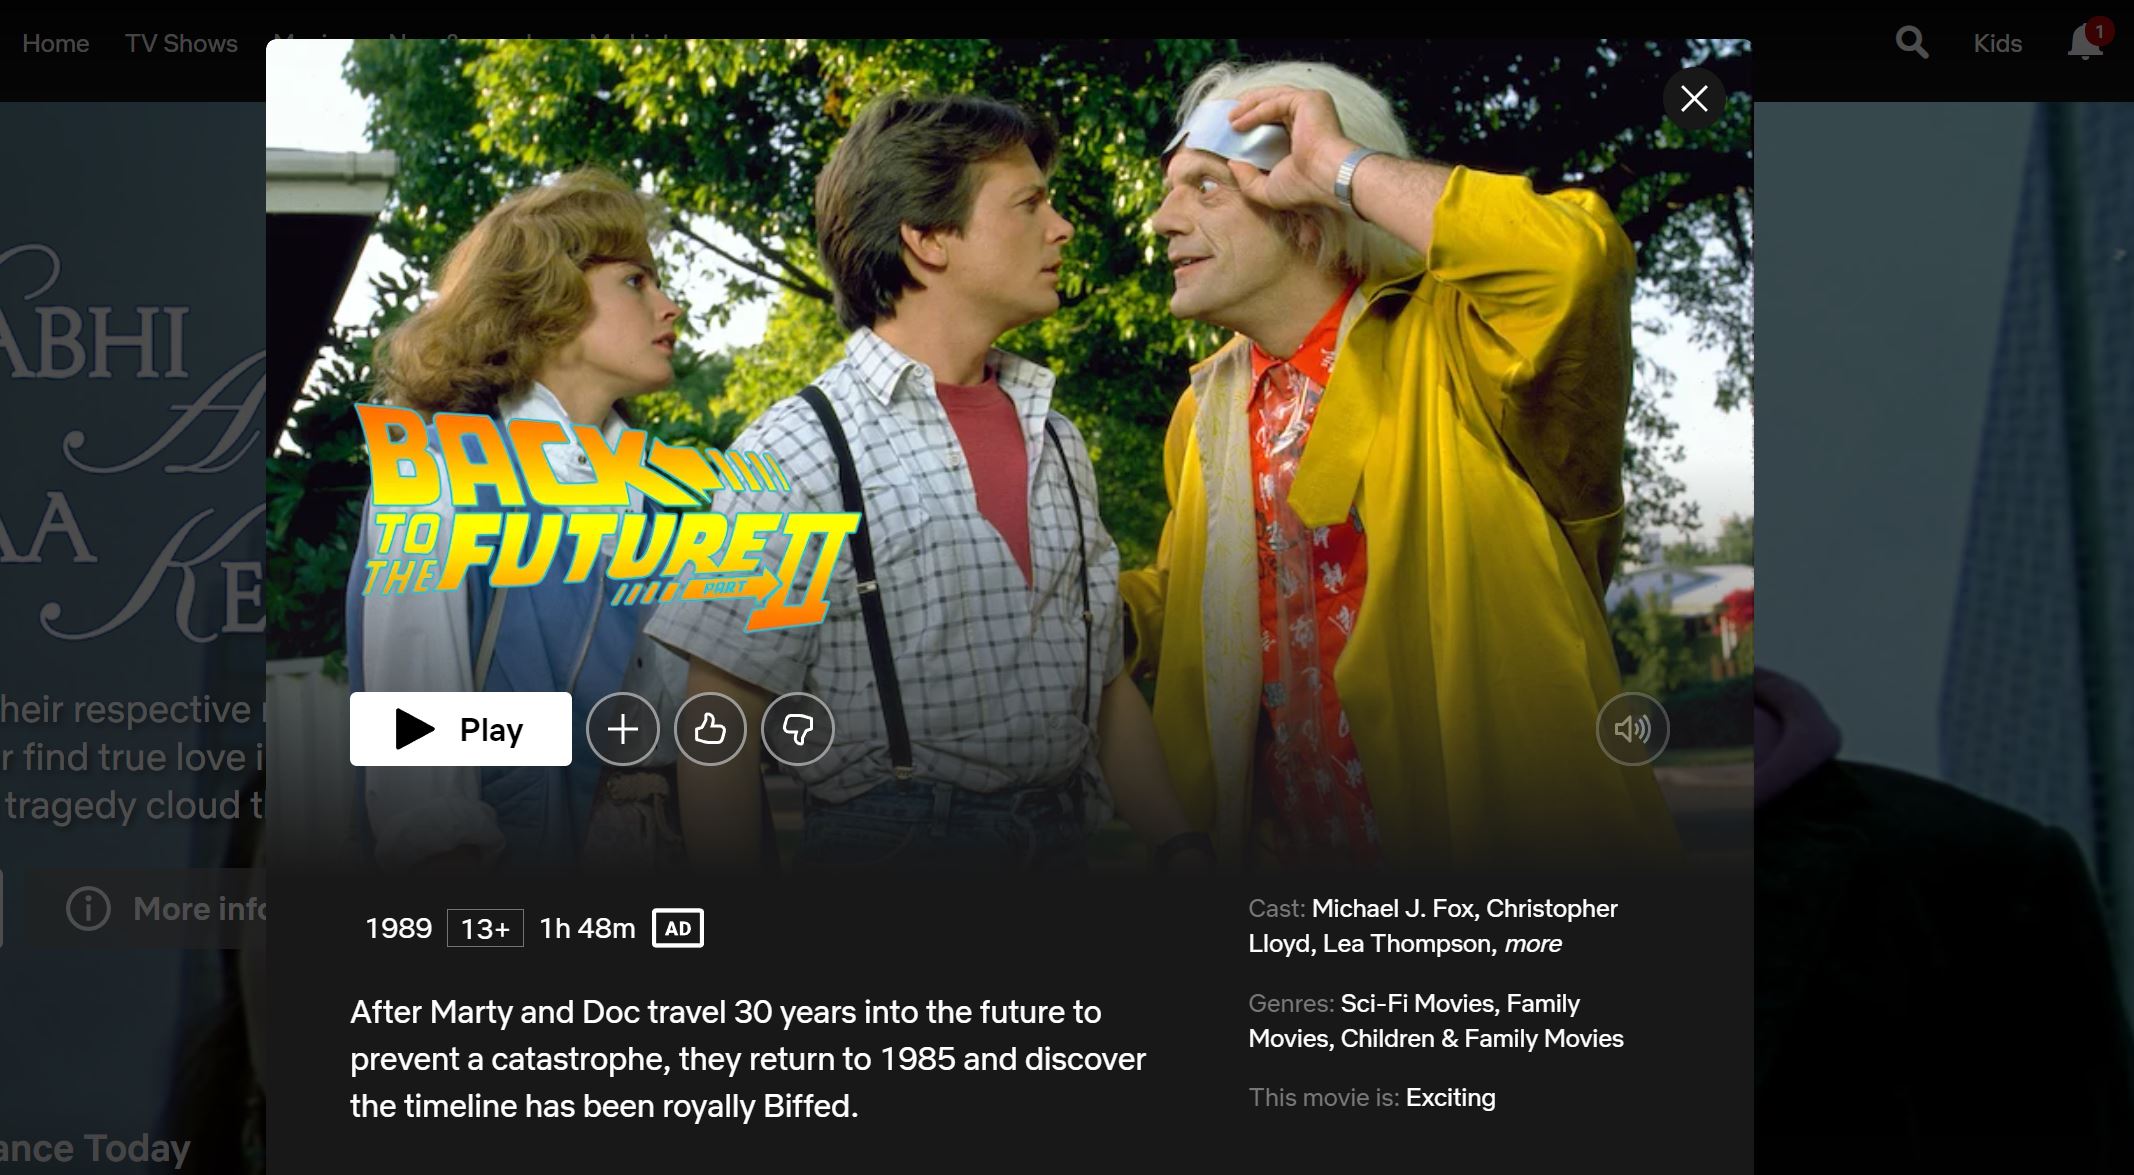 Back to the future 2 Netflix